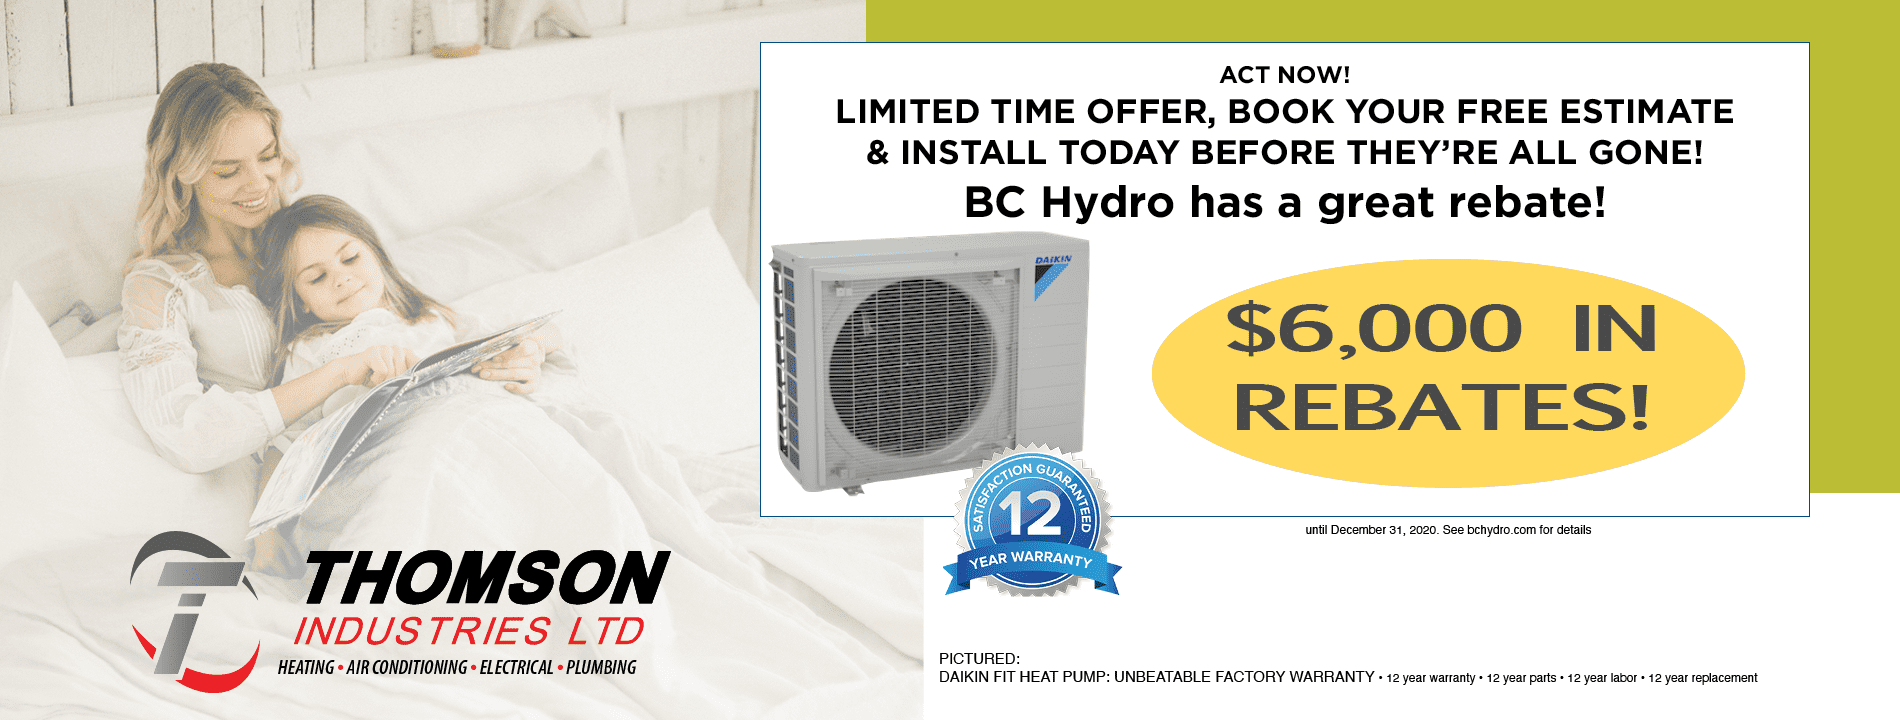 bc-hydro-rebates-save-on-mysa-products-for-a-limited-time